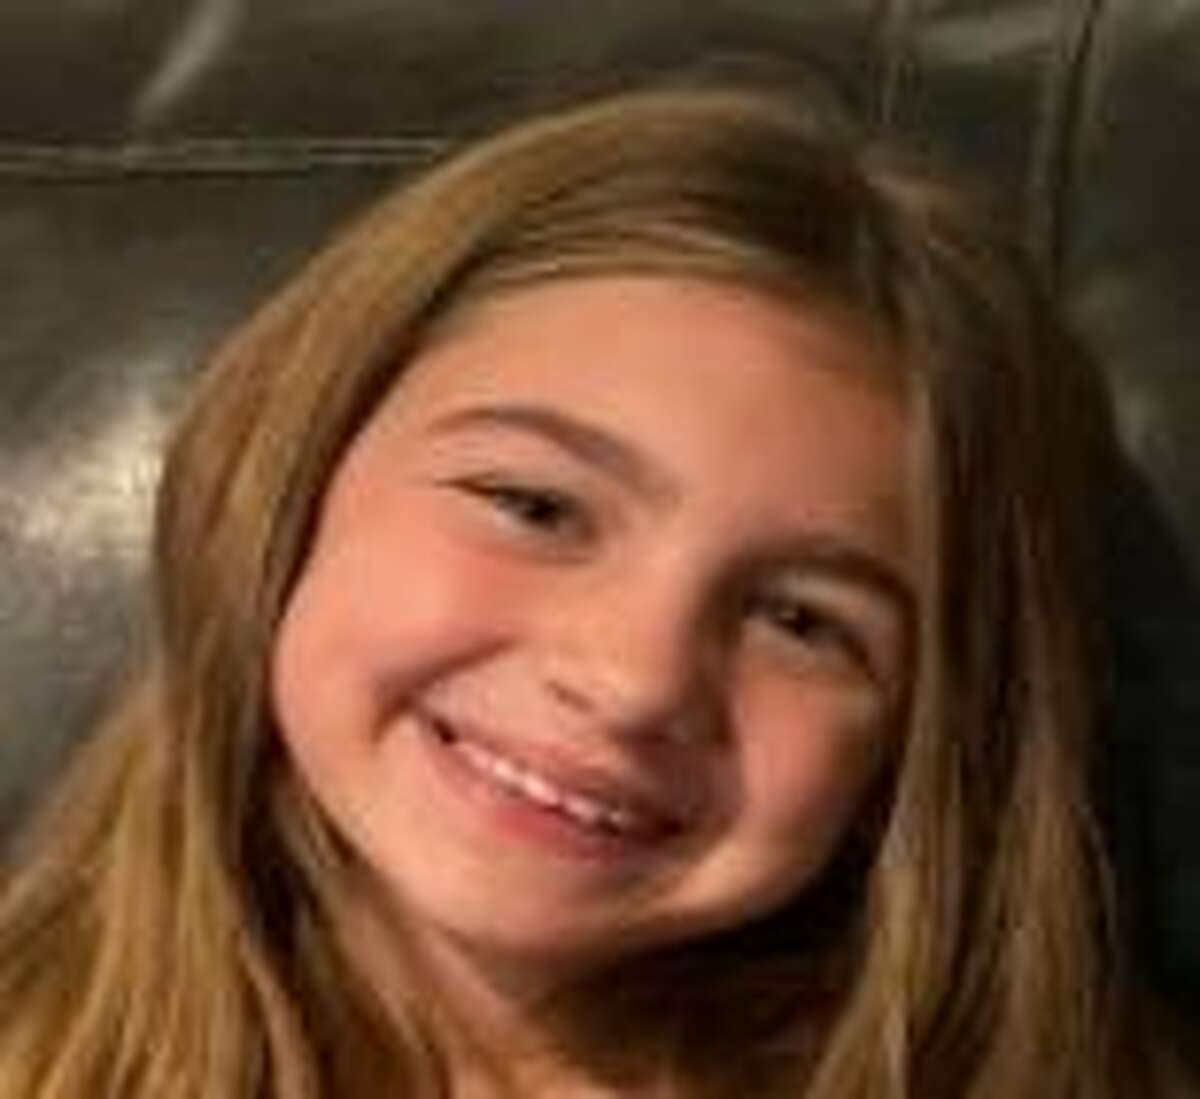 The missing 8-year-old girl from Texas may be in Colorado now, according to the Colorado Bureau of Investigation.